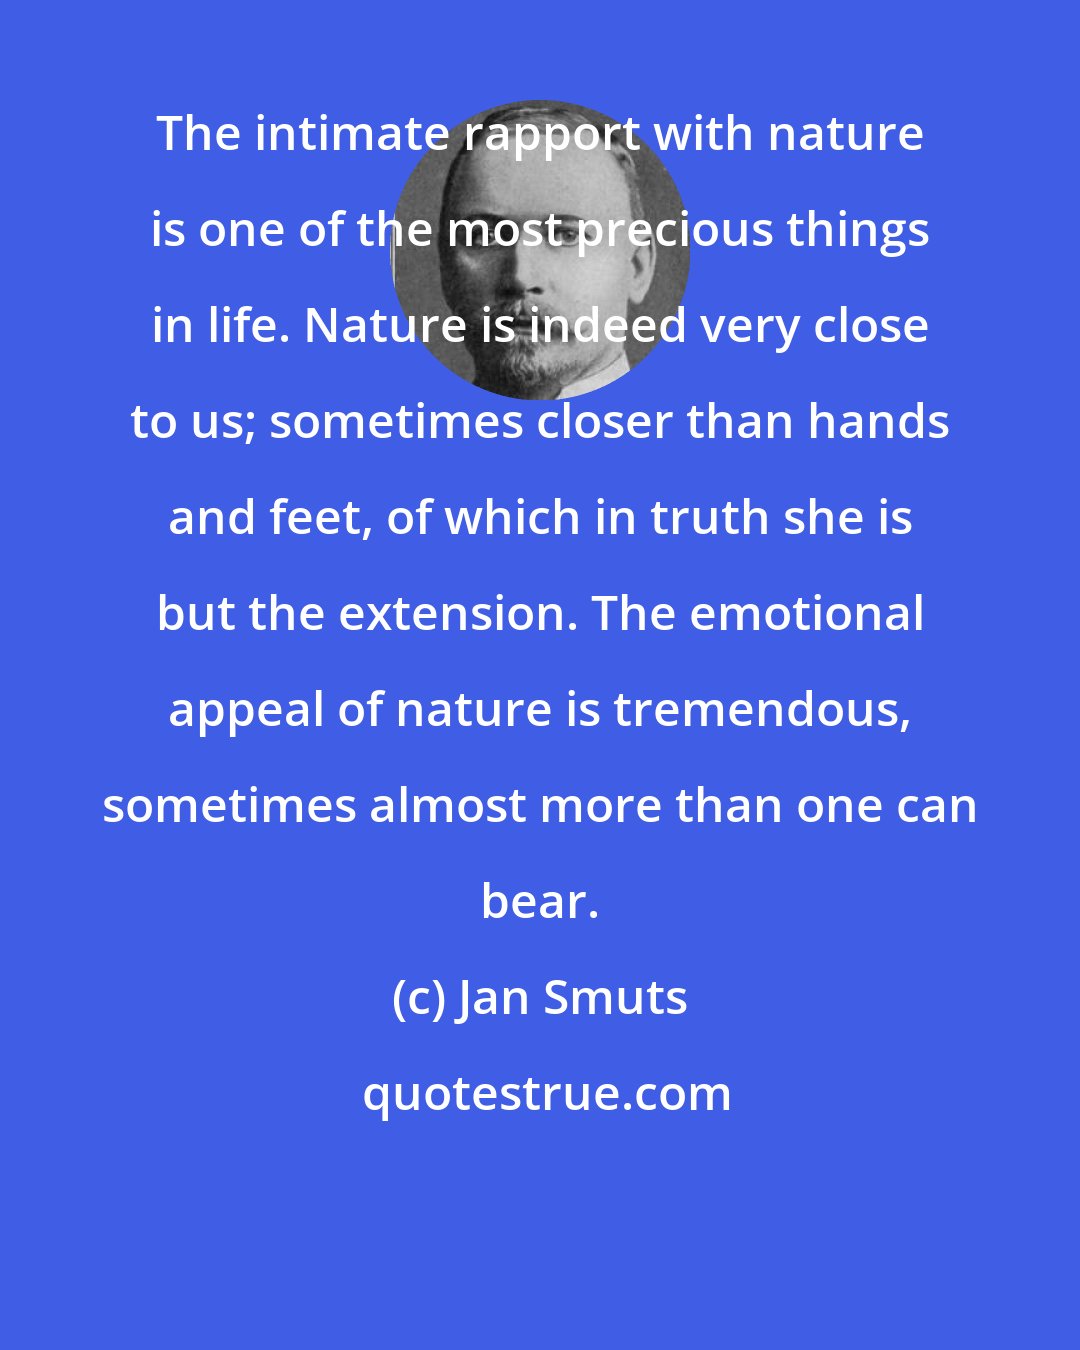 Jan Smuts: The intimate rapport with nature is one of the most precious things in life. Nature is indeed very close to us; sometimes closer than hands and feet, of which in truth she is but the extension. The emotional appeal of nature is tremendous, sometimes almost more than one can bear.